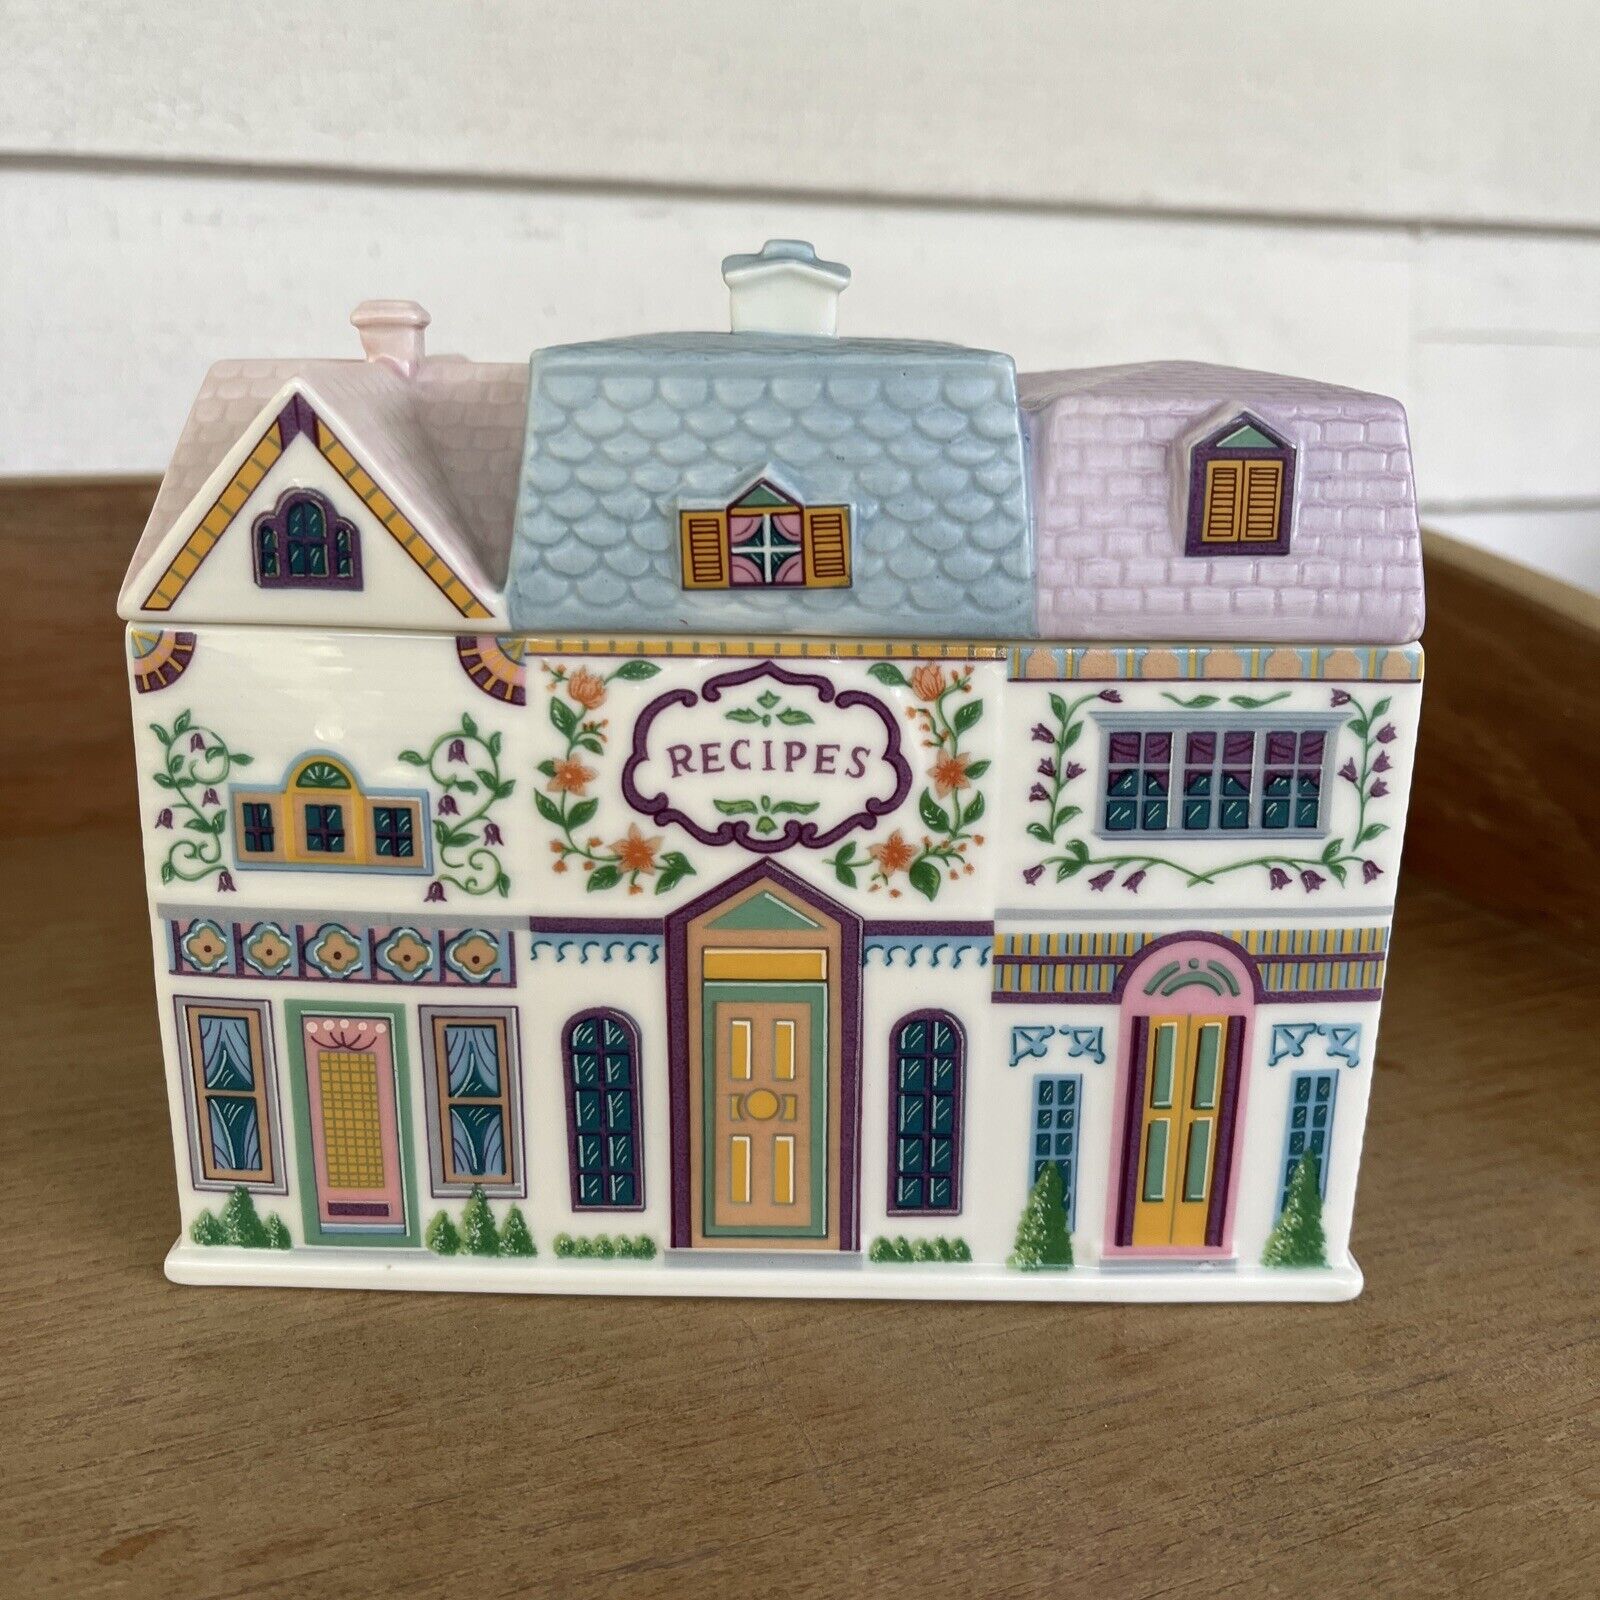 RARE Lenox Village Recipe Card Box, Retired, mint condition. Mothers Day Gift